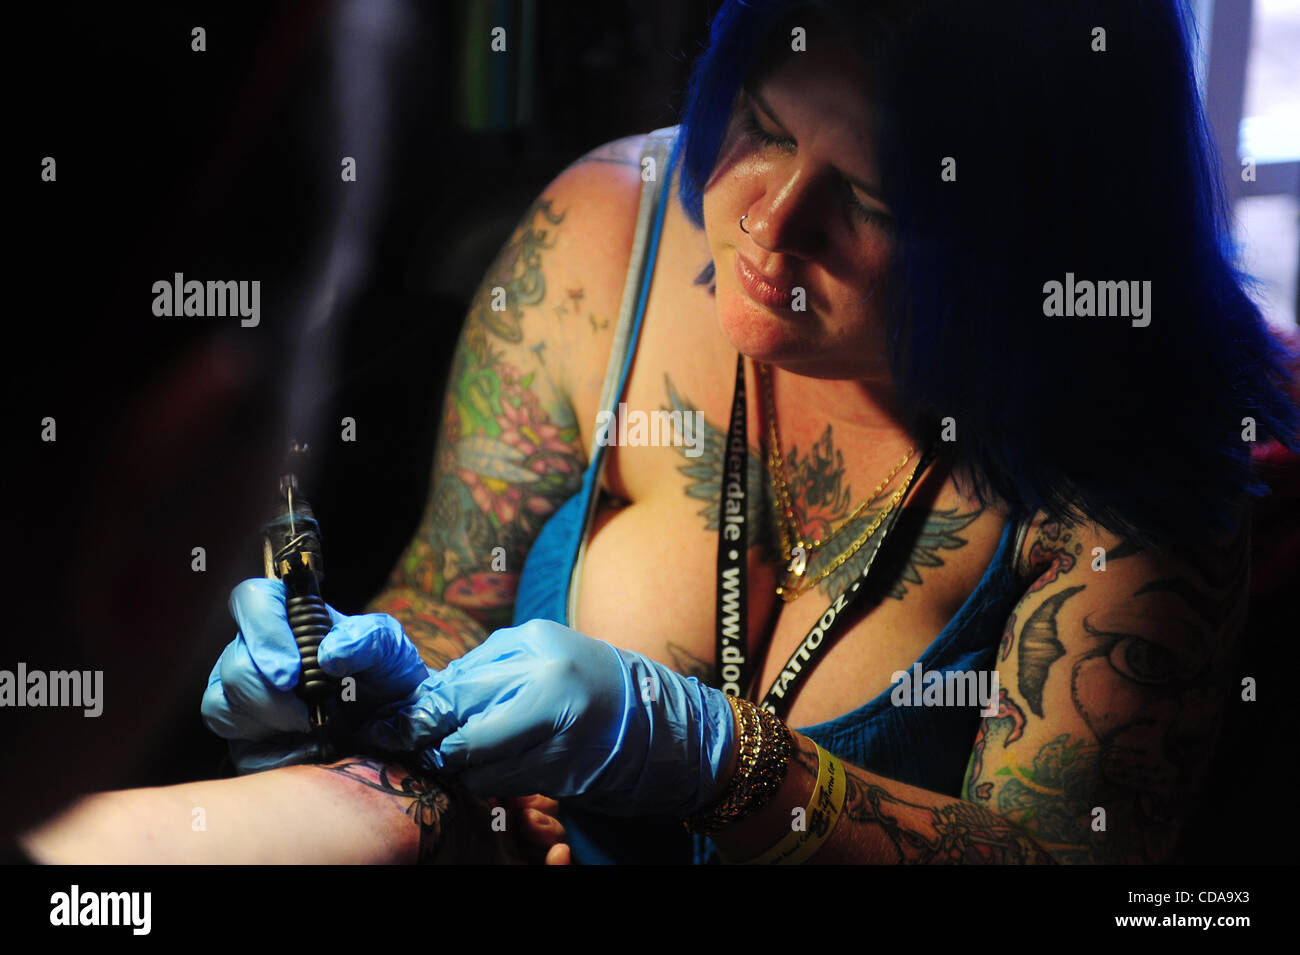 Aug. 15, 2010 - Deerfield Beach, FL - Florida, USA - United States - (CAV) TATTOO 0815D.CAV Heather Stephens of  Doc's Tattooz of Ft. Lauderdale tattoos an butterly on the wrist of Katie Brost of Ft. Lauderdale,  during the 15th Annual South Florida Tattoo Expo, Sunday, Aug. 15, at the Hilton in Dee Stock Photo